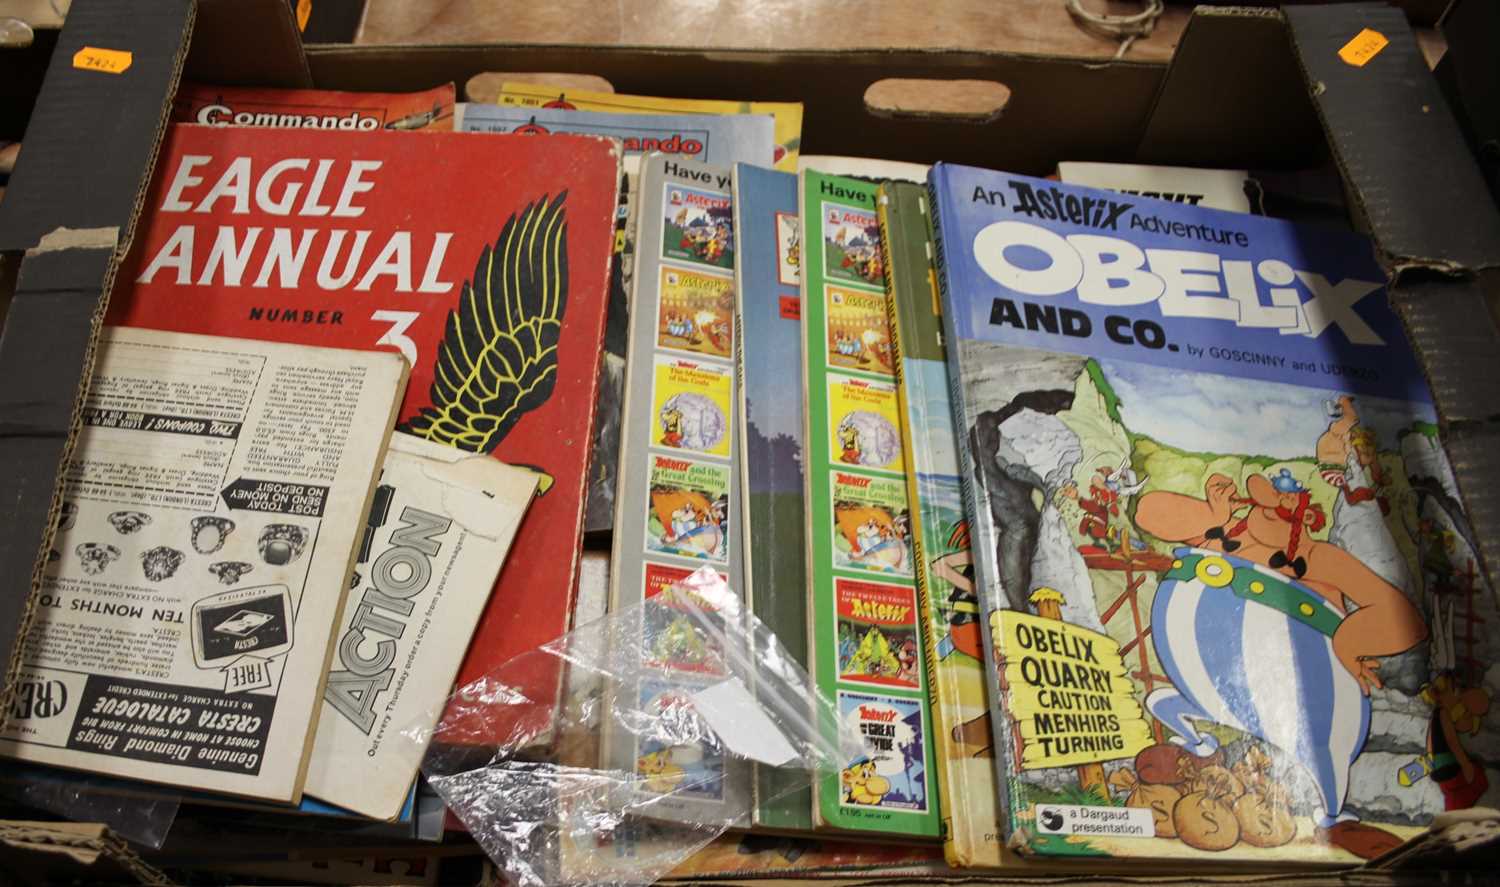 A collection of vintage children's books and comics, to include Asterix & Obelix, The Eagle annual